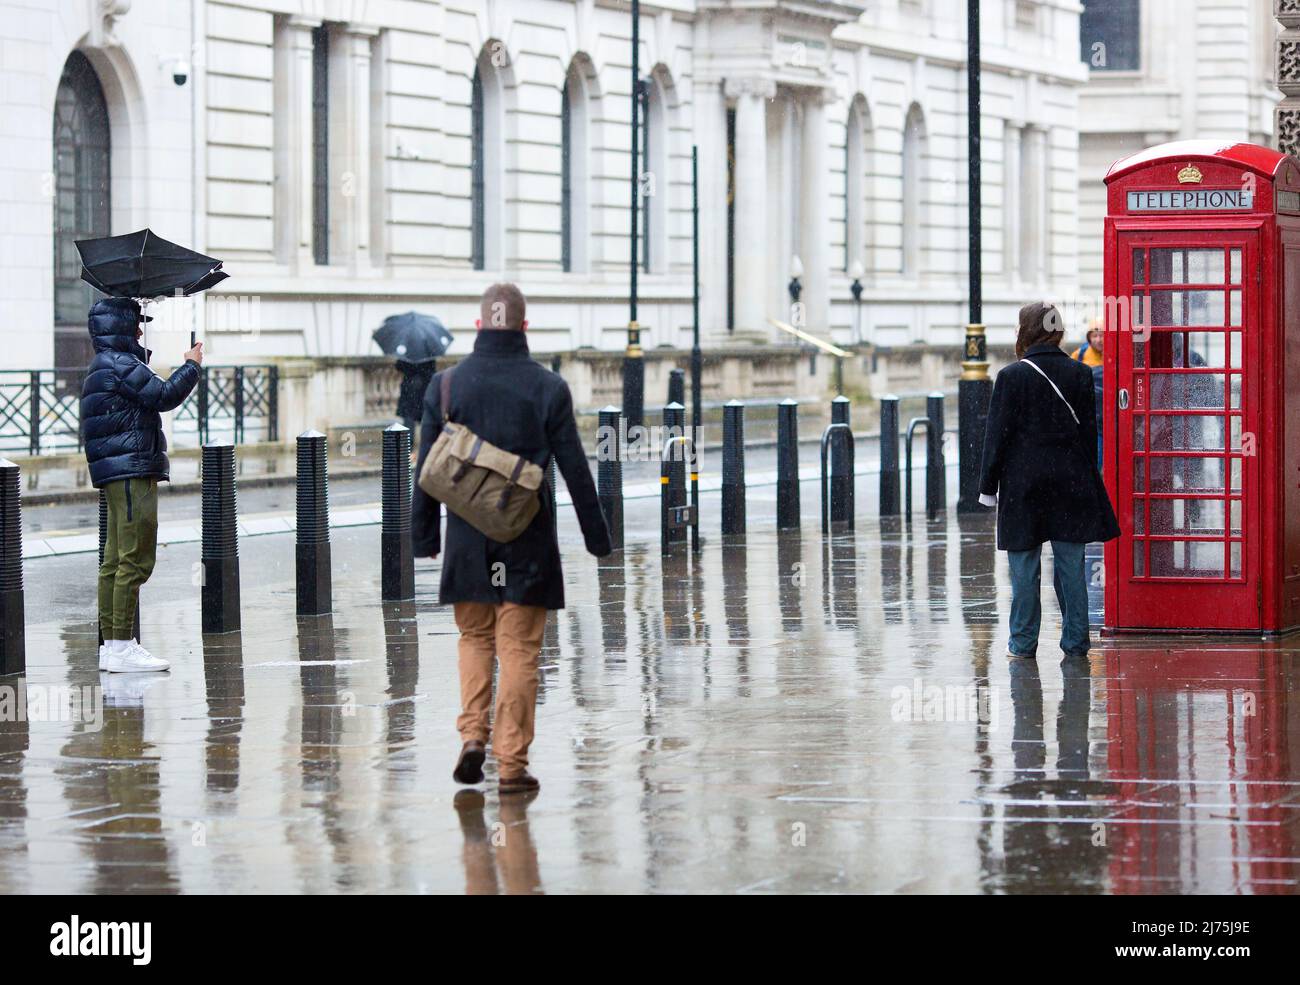 A person whose umbrella is seen blown by the wind takes a photograph of his company as a pedestrian walks past them in Westminster, central London. Stock Photo